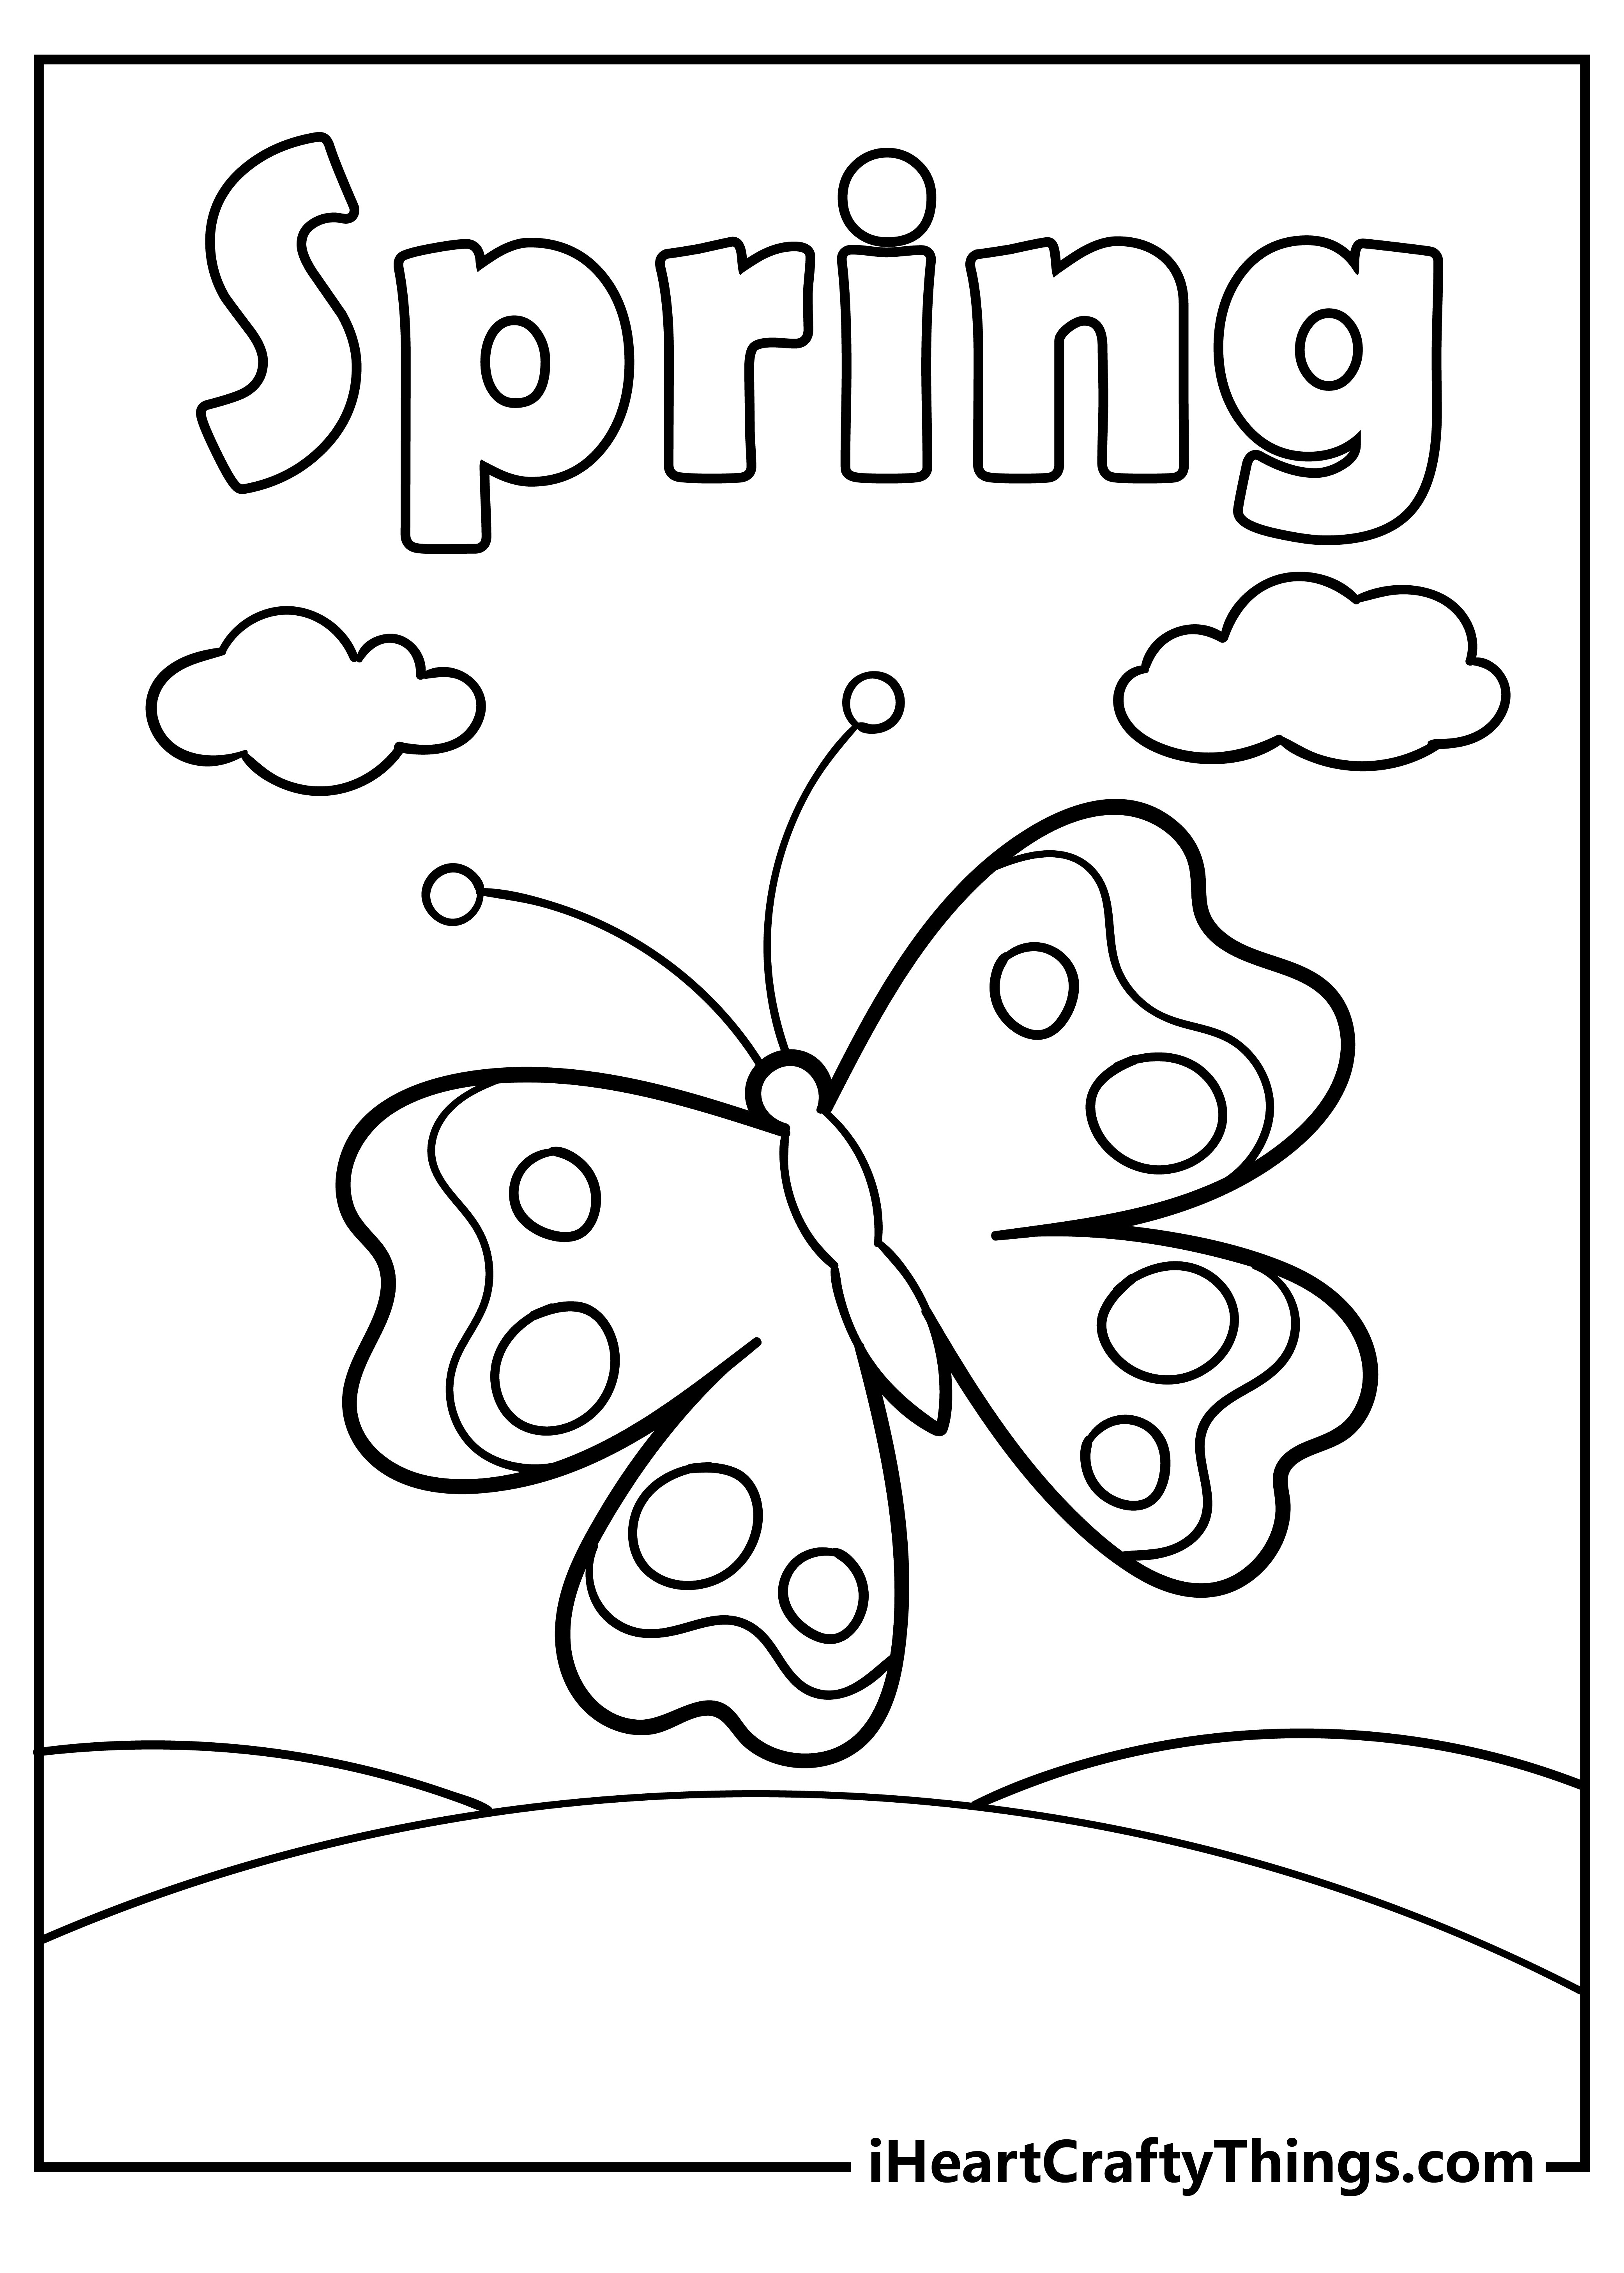 Spring Coloring Pages for preschoolers free printable